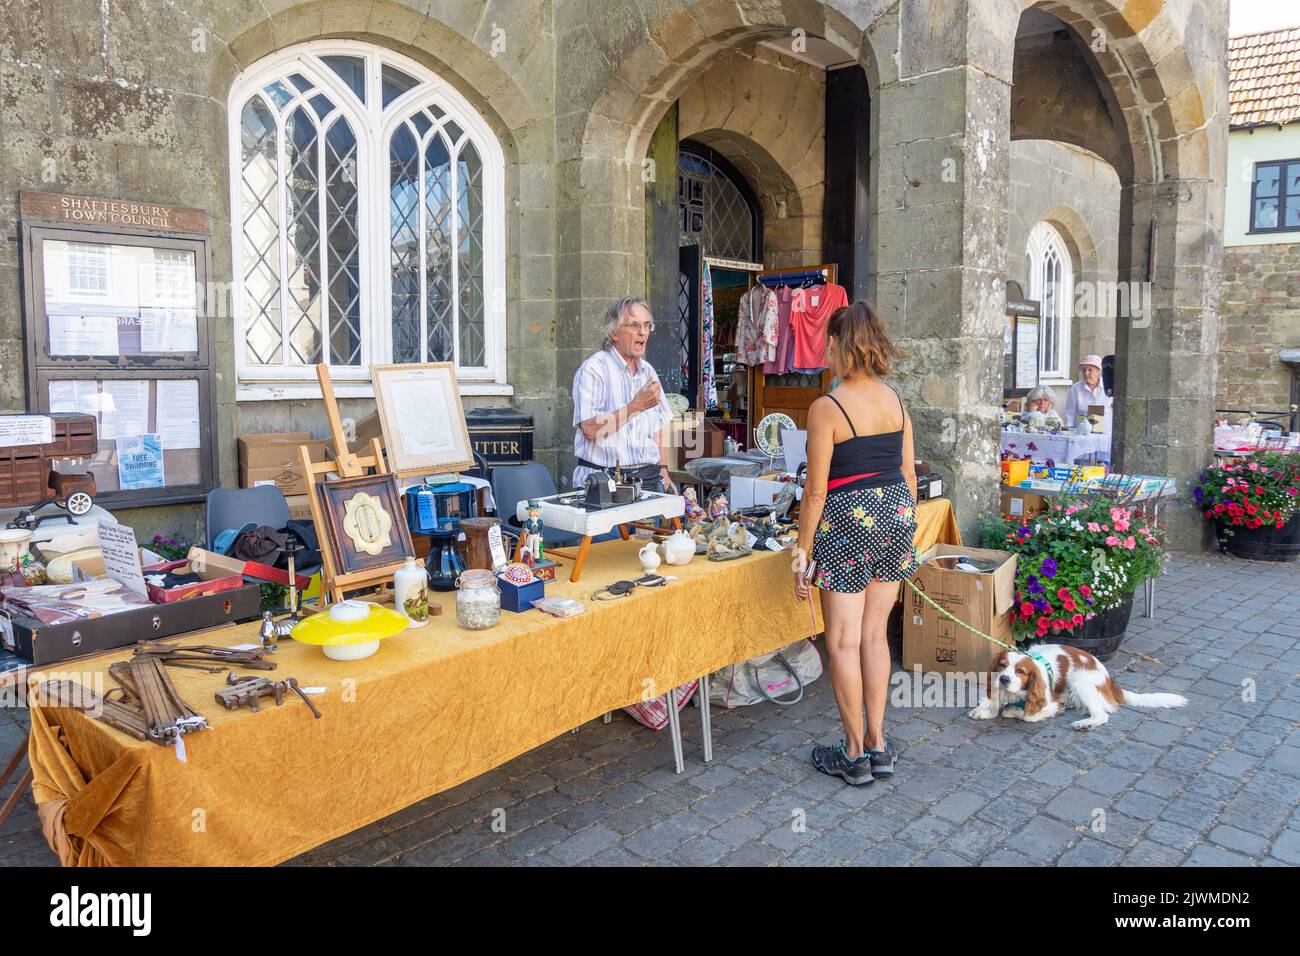 Antique stall outside The Town Hall, High Street, Shaftesbury, Dorset, England, United Kingdom Stock Photo